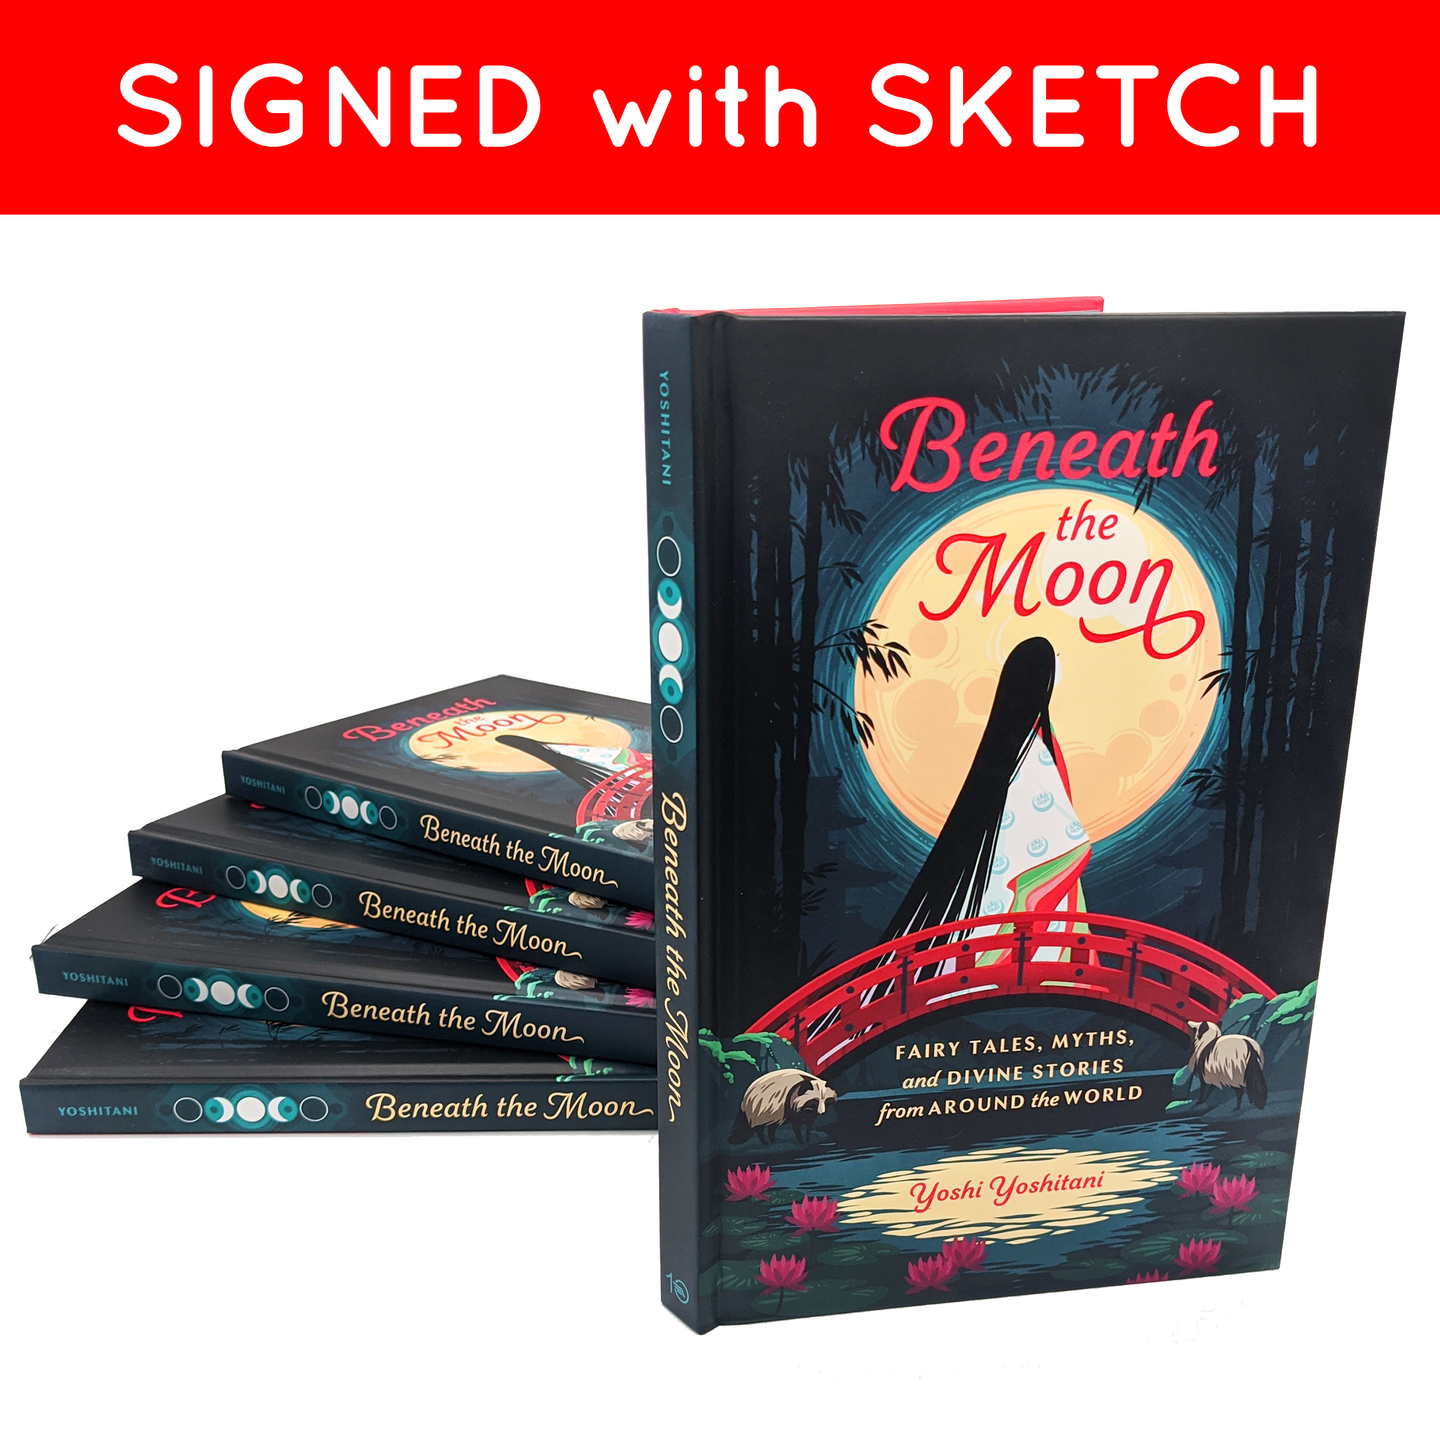 Beneath the Moon Signed Book